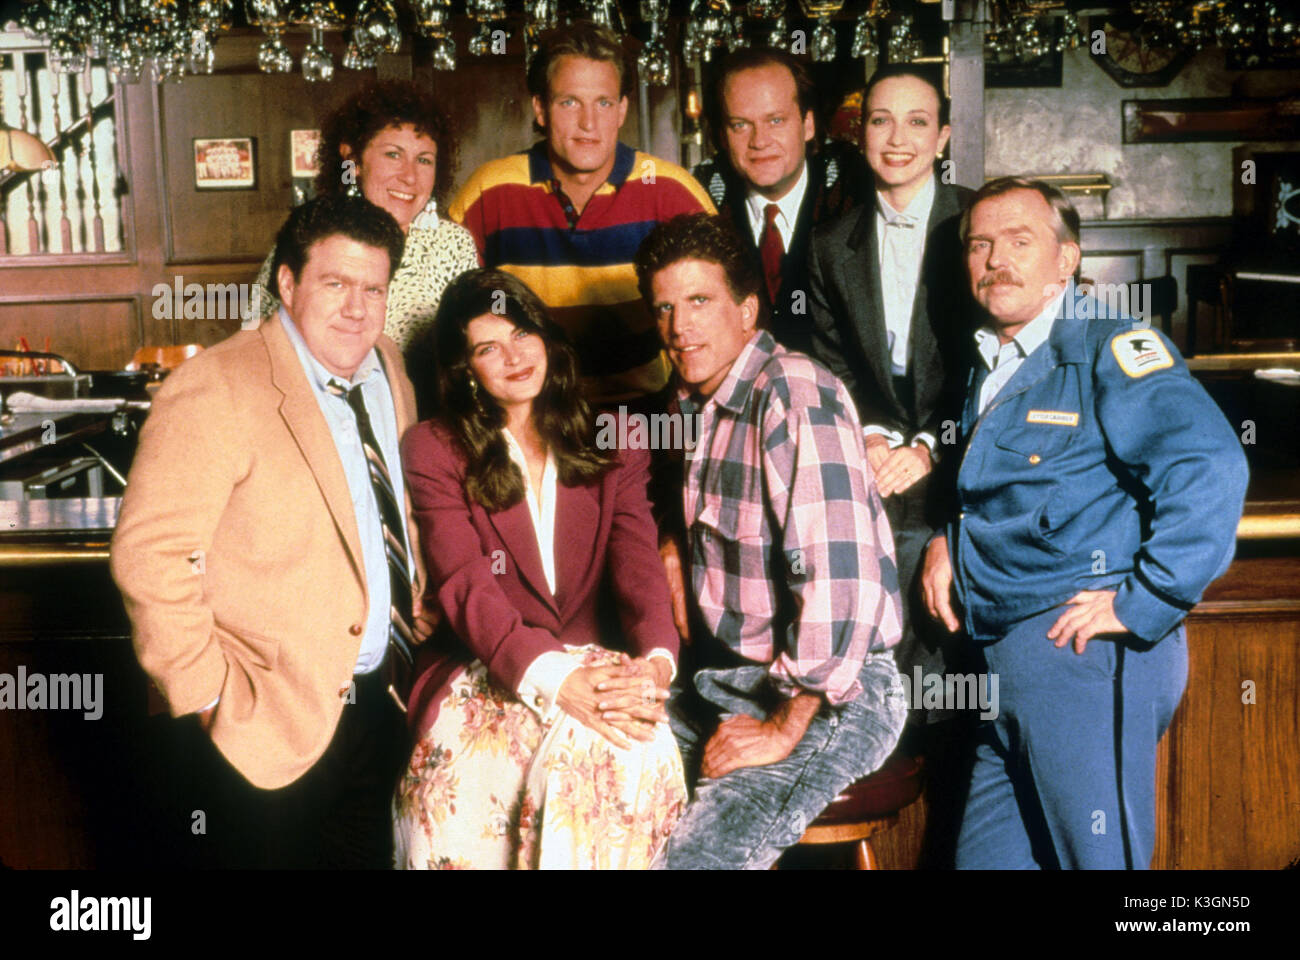 CHEERS RHEA PERLMAN as Carla Tortelli, WOODY HARRELSON as Woody Boyd, KELSEY GRAMMER as Dr Frasier Crane, BEBE NEUWIRTH as Dr Lilith Sternin-Crane [front row] GEORGE WENDT as Norm Peterson, KIRSTIE ALLEY as Rebecca Howe, TED DANSON as Sam Malone, JOHN RATZENBERGER as Cliff Clavin Stock Photo